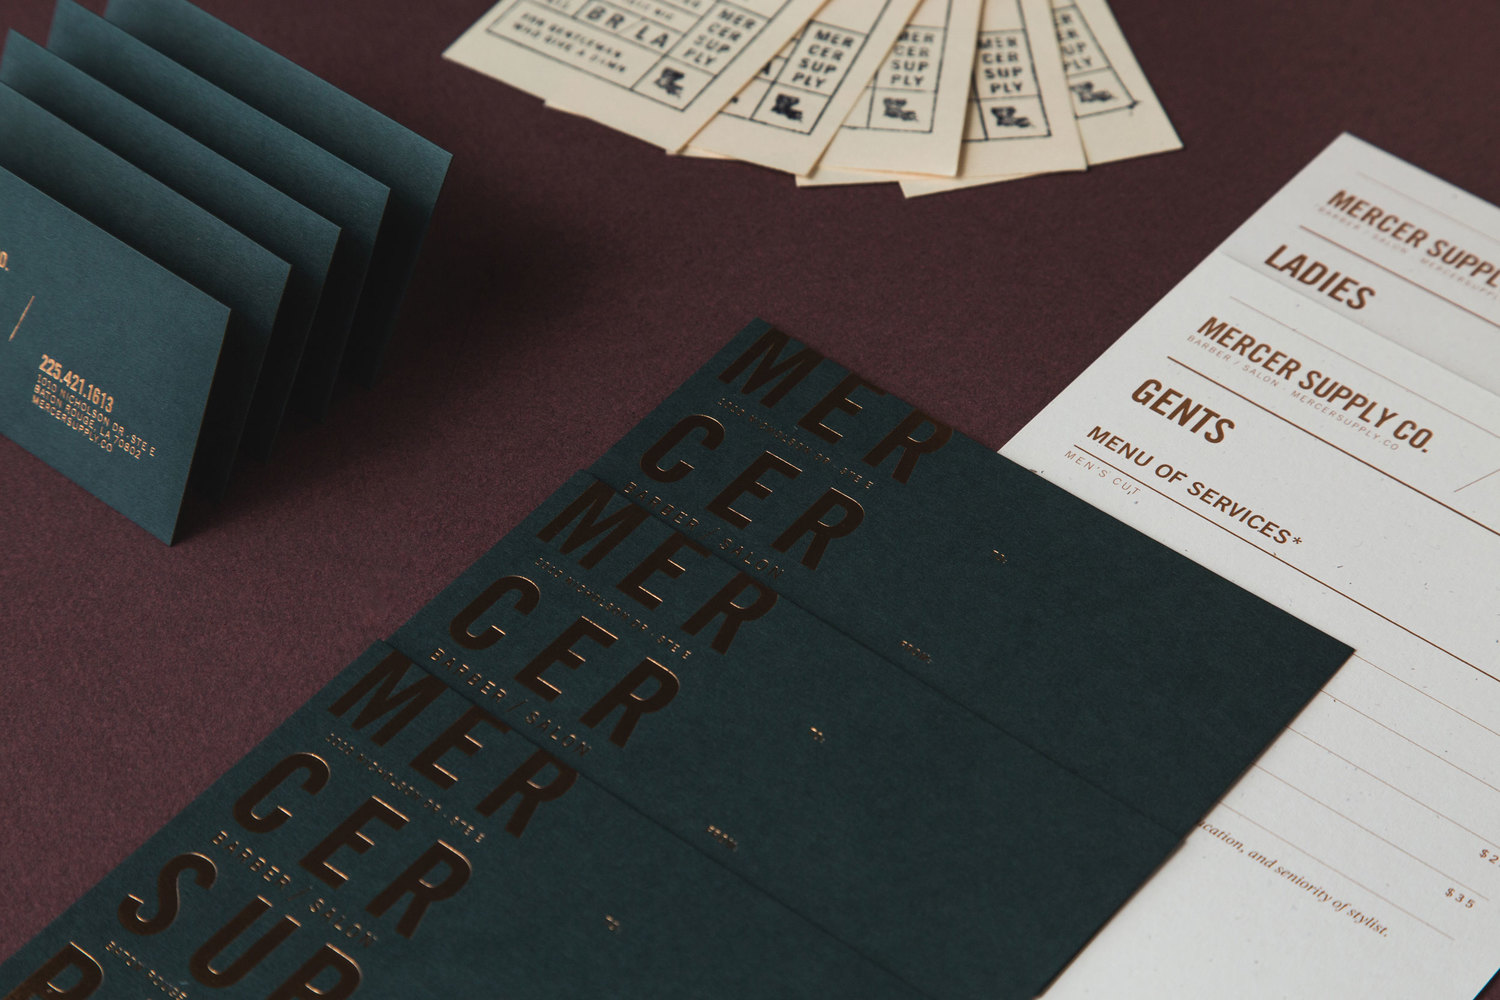 Branding for Baton Rouge salon and barber Mercer Supply Co. designed by Peck & Co.